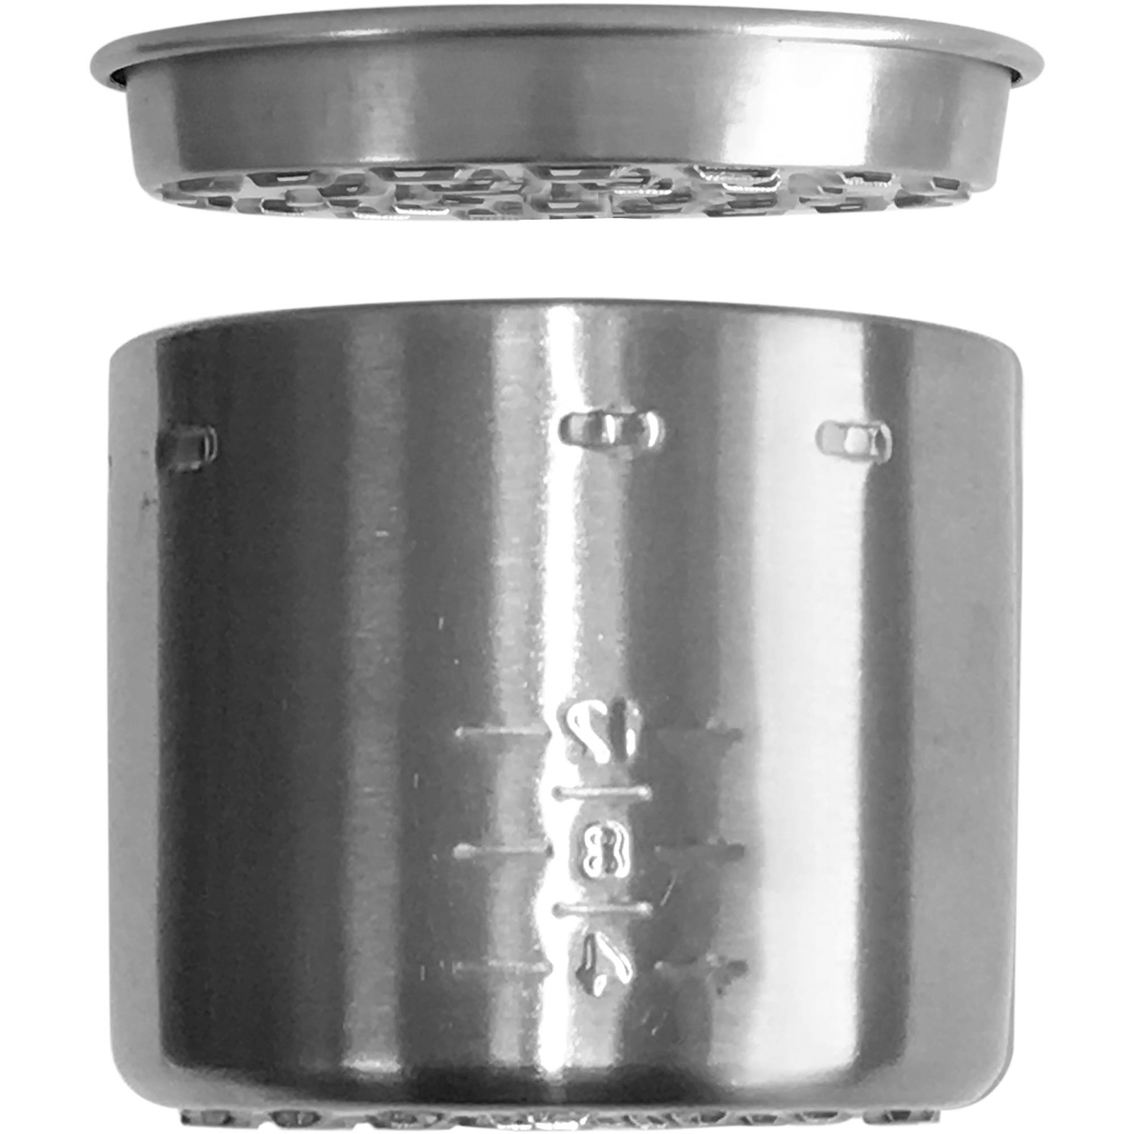 West Bend 12 Cup Stainless Steel Percolator - Image 6 of 6